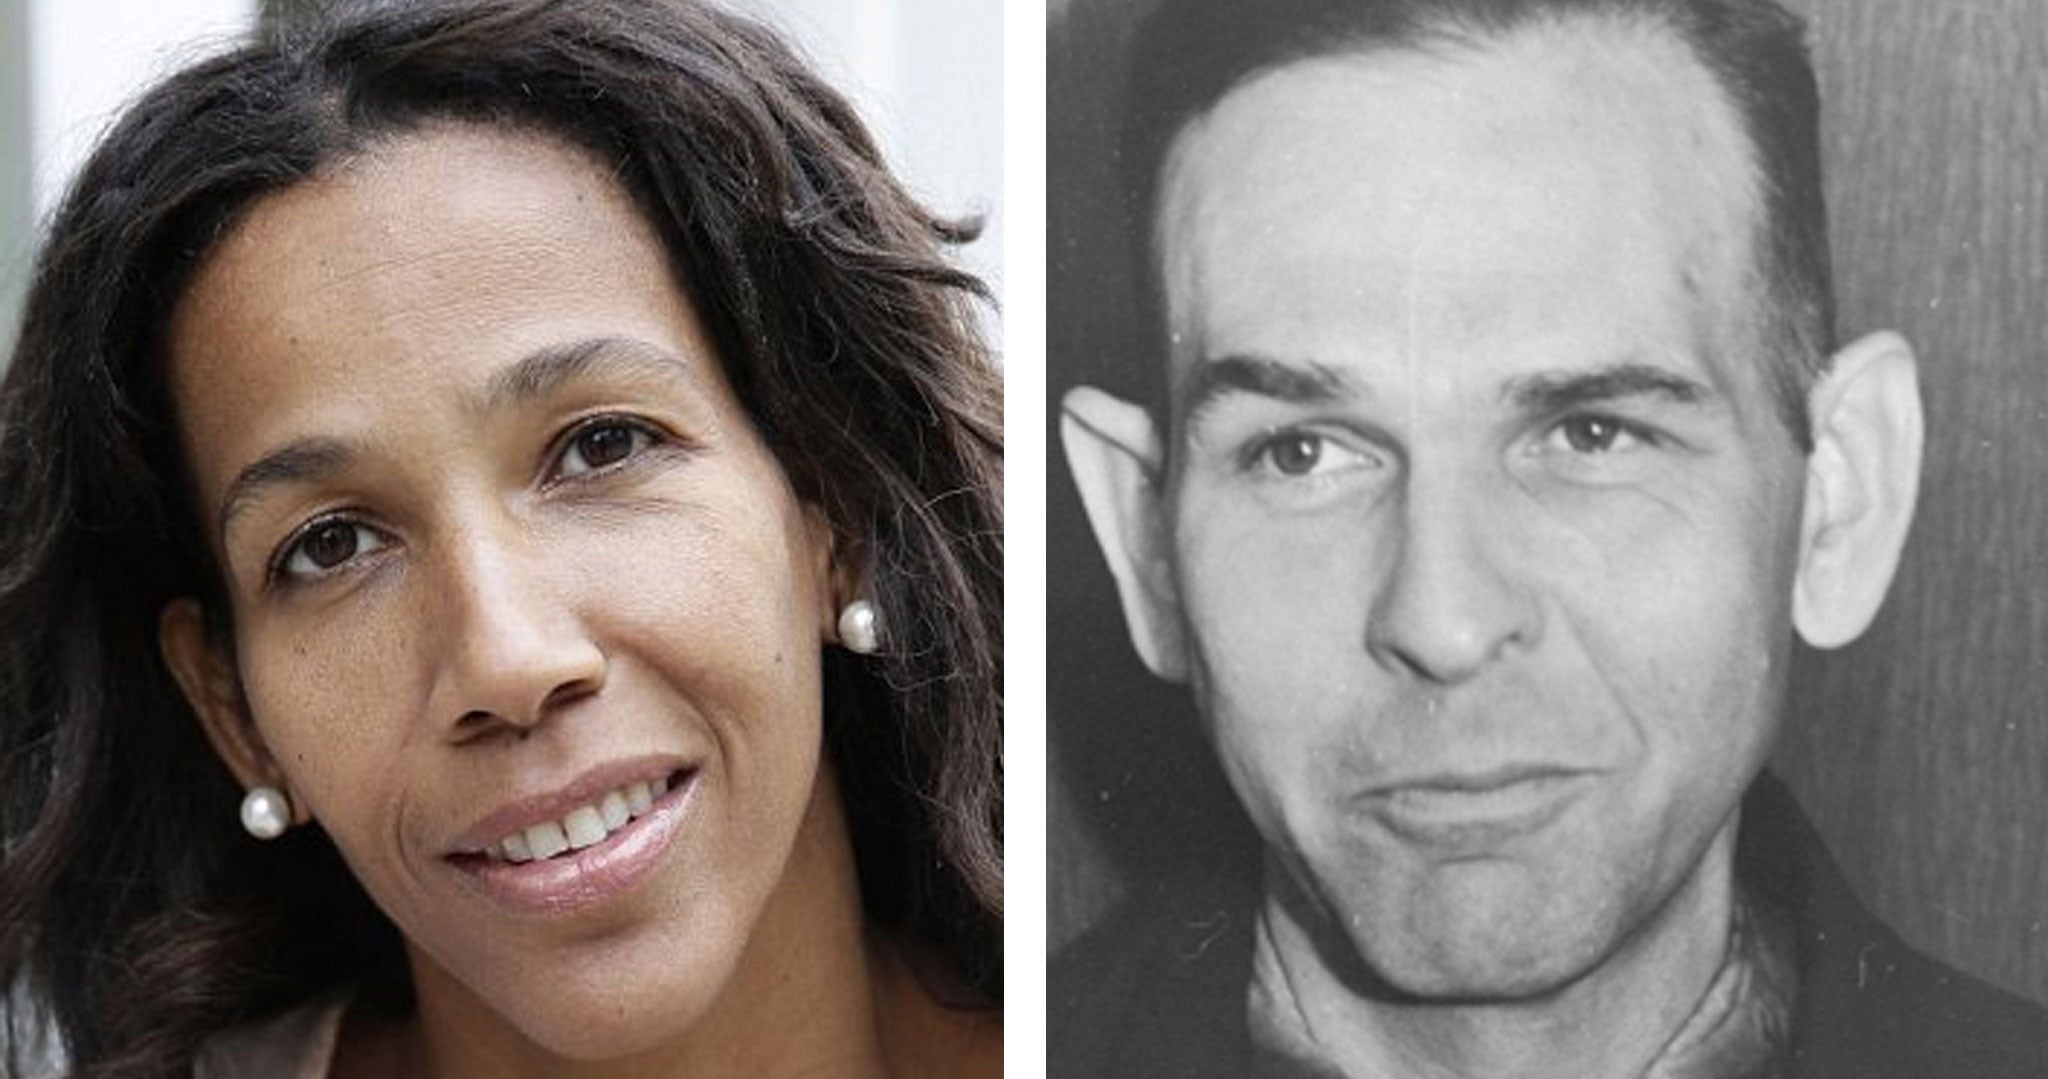 Author Jennifer Teege, who was adopted shortly after birth, stumbled on her shocking family secret after coming across a book about the brutal Nazi commander written by her birth mother Monika Goeth.